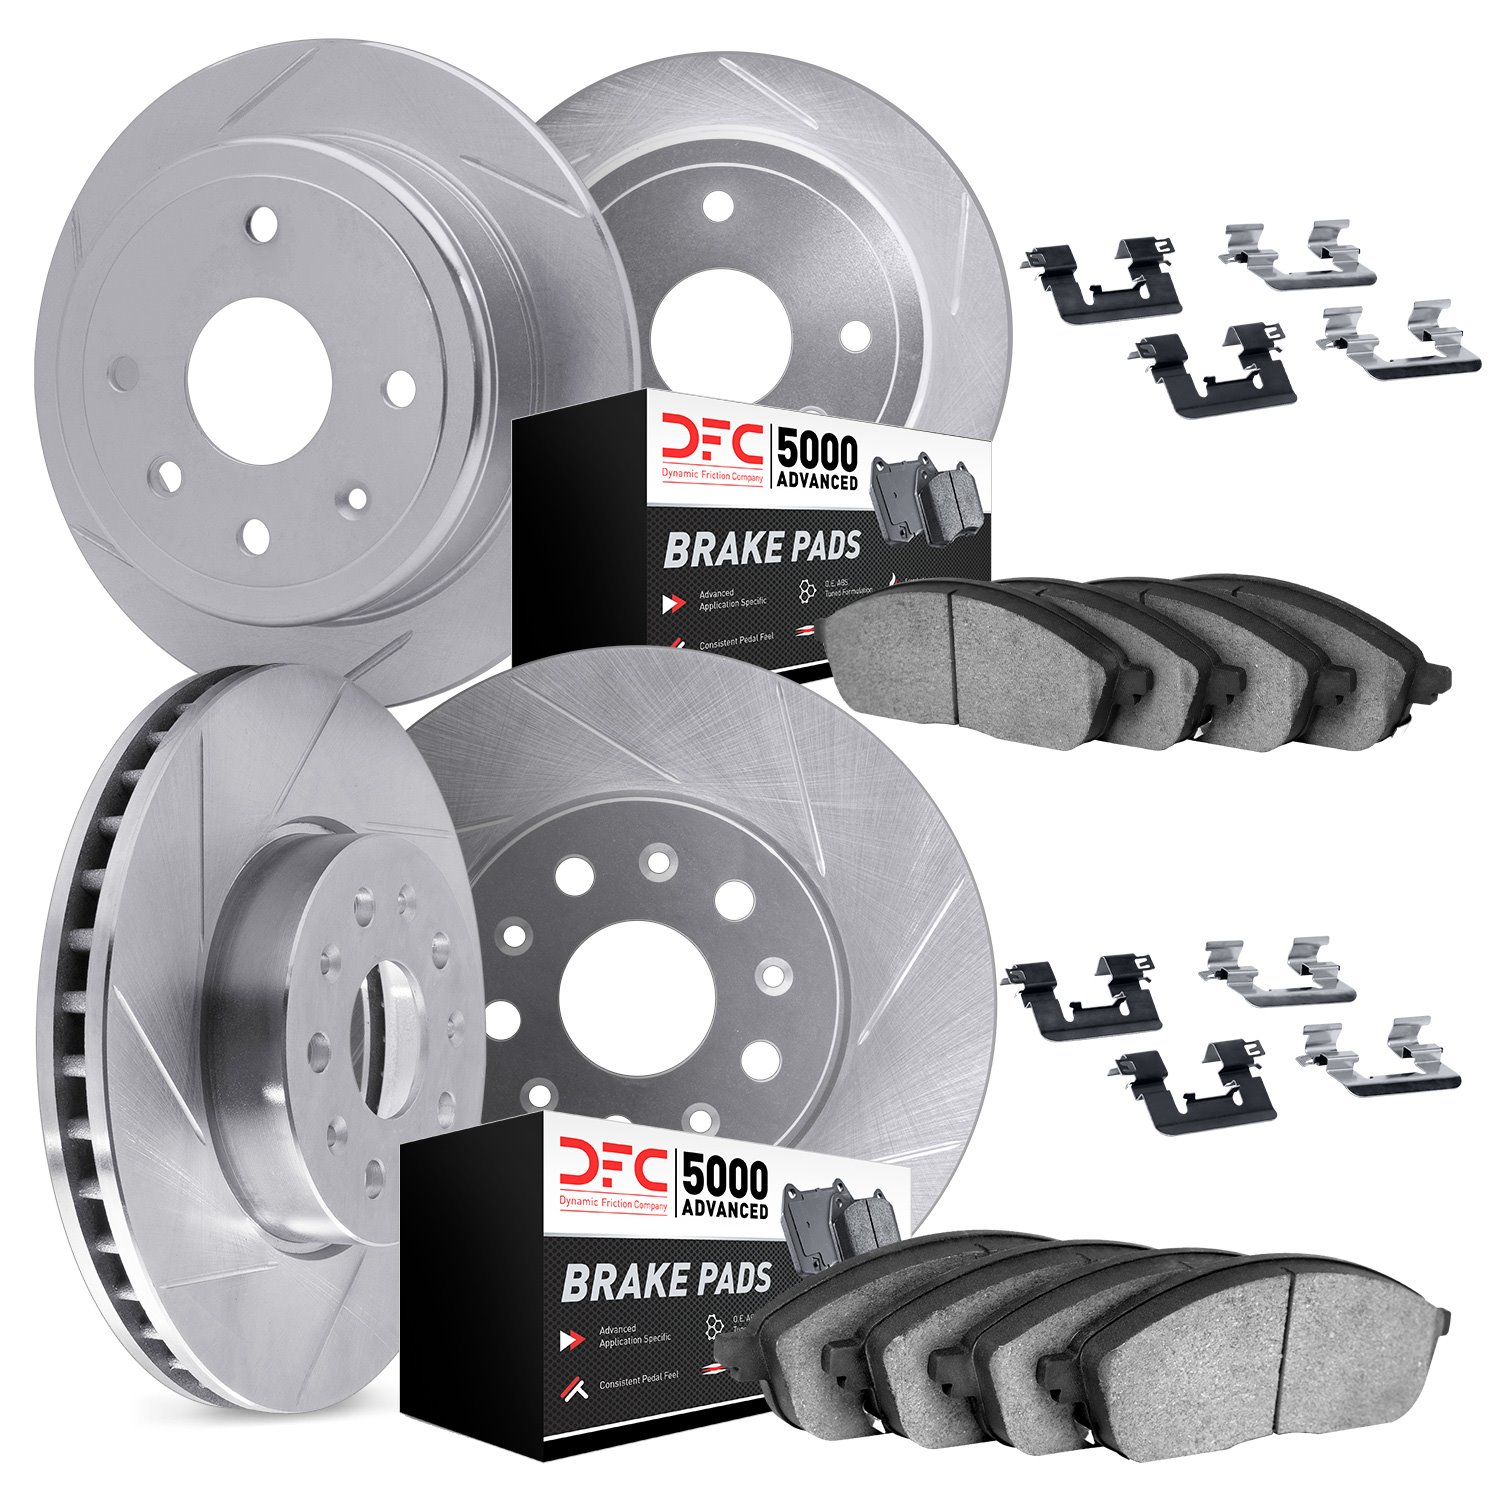 5514-59082 Slotted Brake Rotors w/5000 Advanced Brake Pads Kit & Hardware [Silver], 2007-2015 Acura/Honda, Position: Front and R